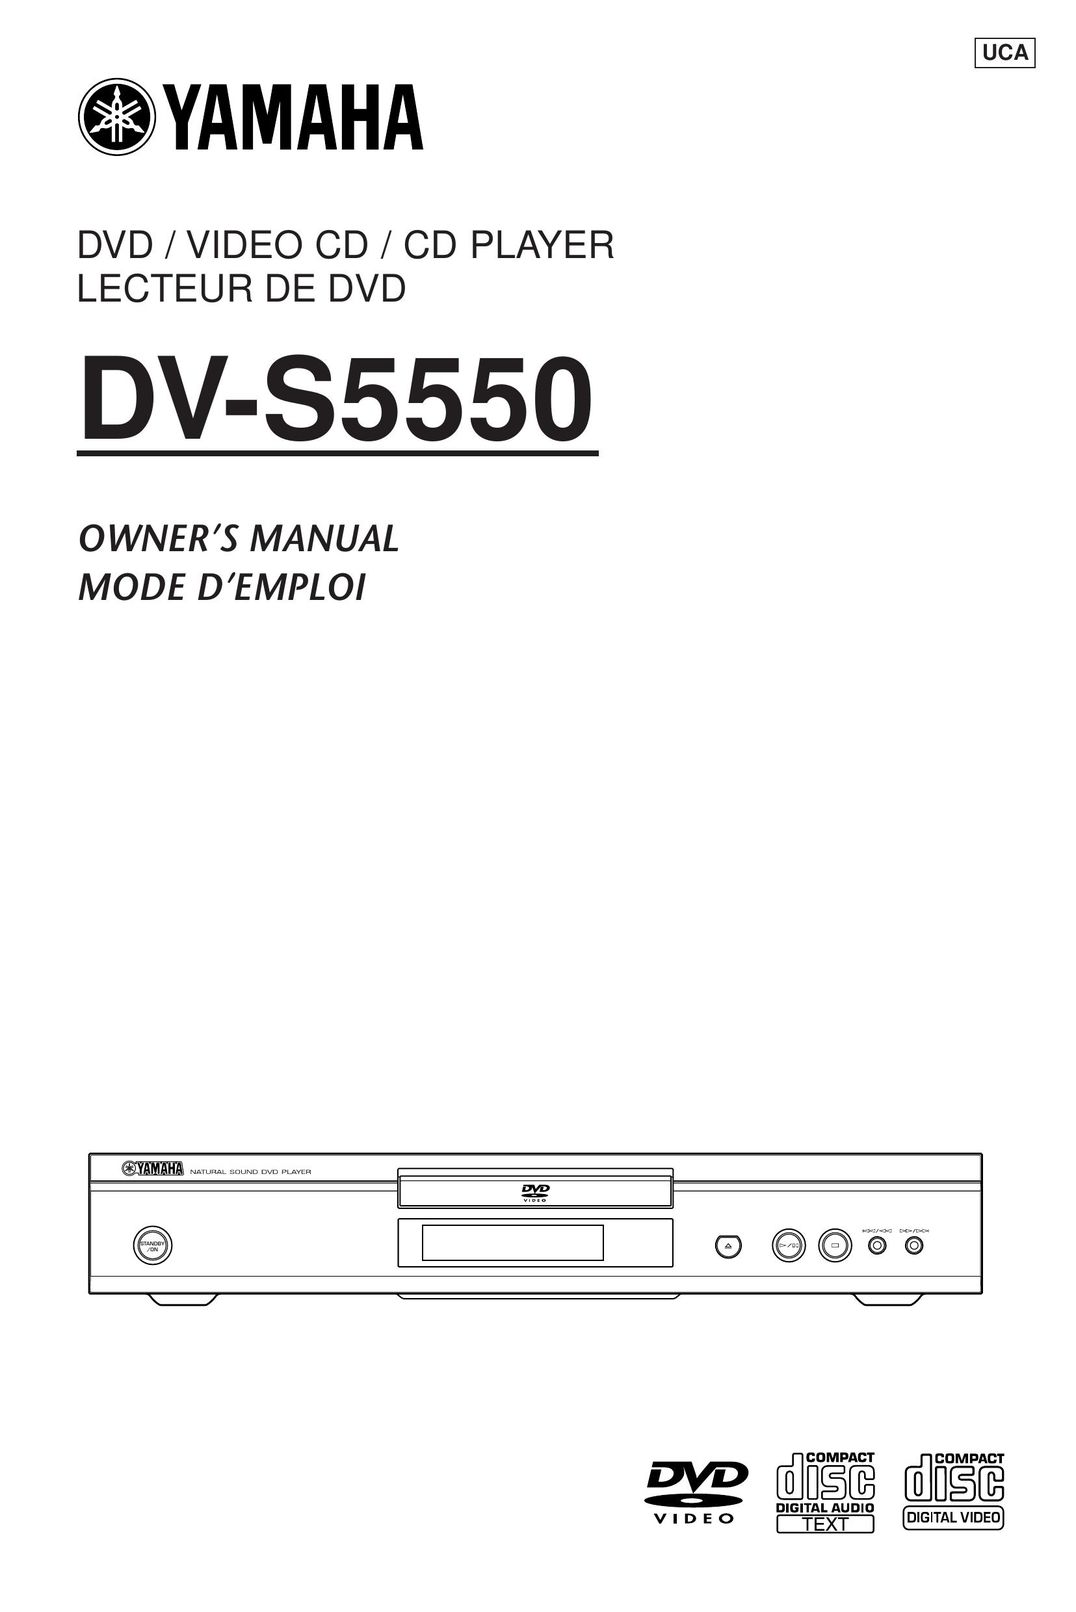 Yamaha DV-S5550 Home Theater System User Manual